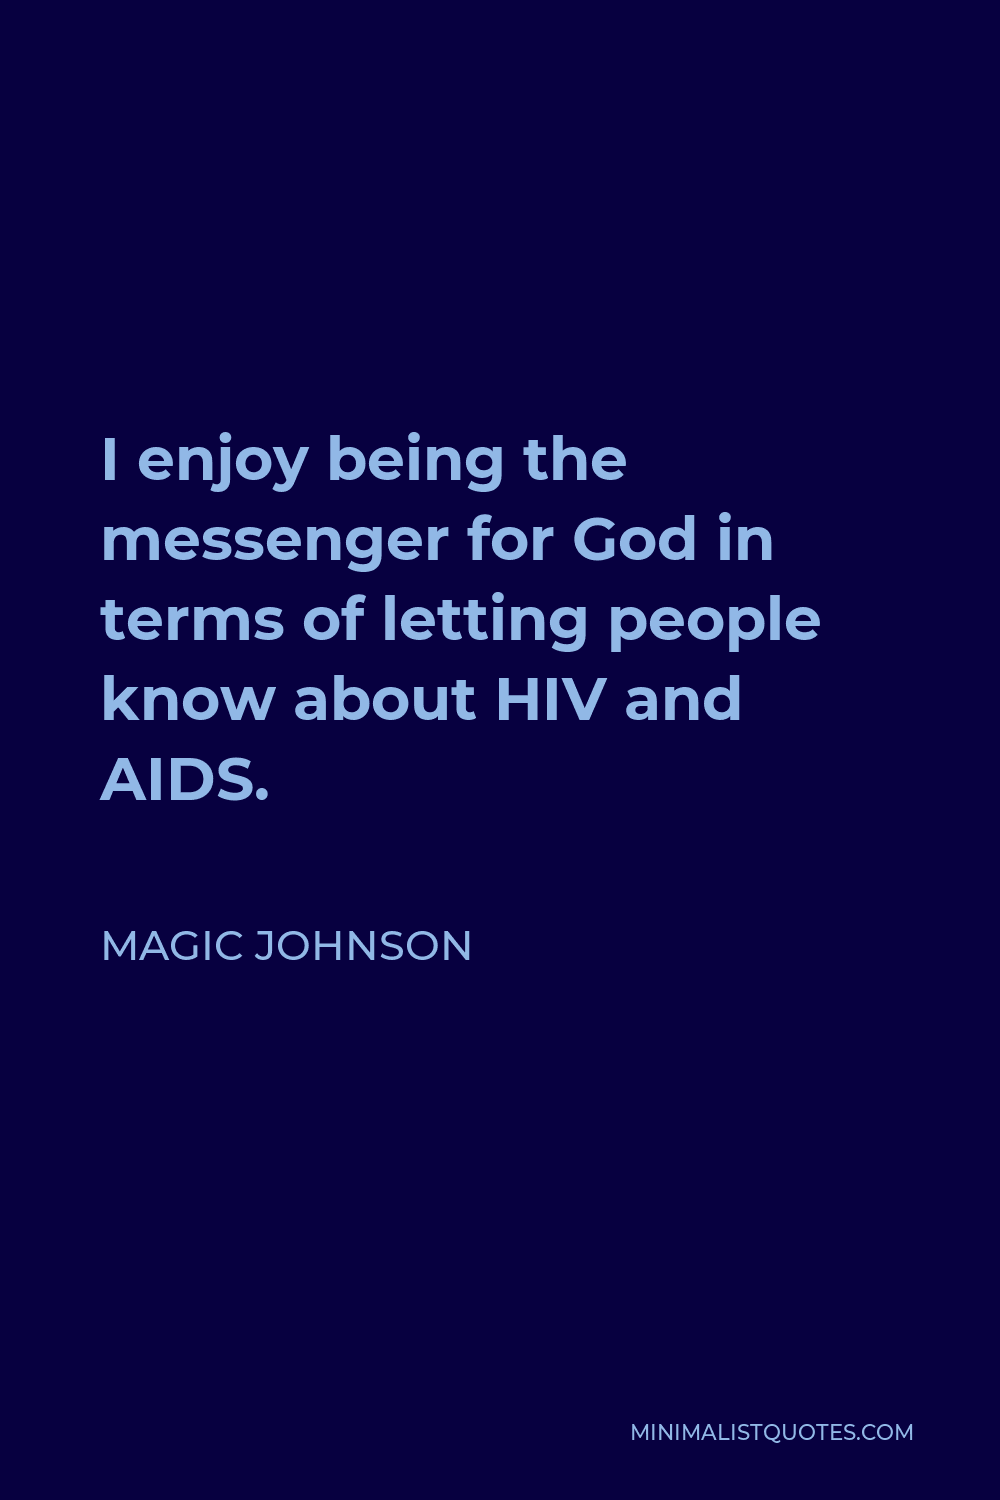 Magic Johnson Quote - I enjoy being the messenger for God in terms of letting people know about HIV and AIDS.